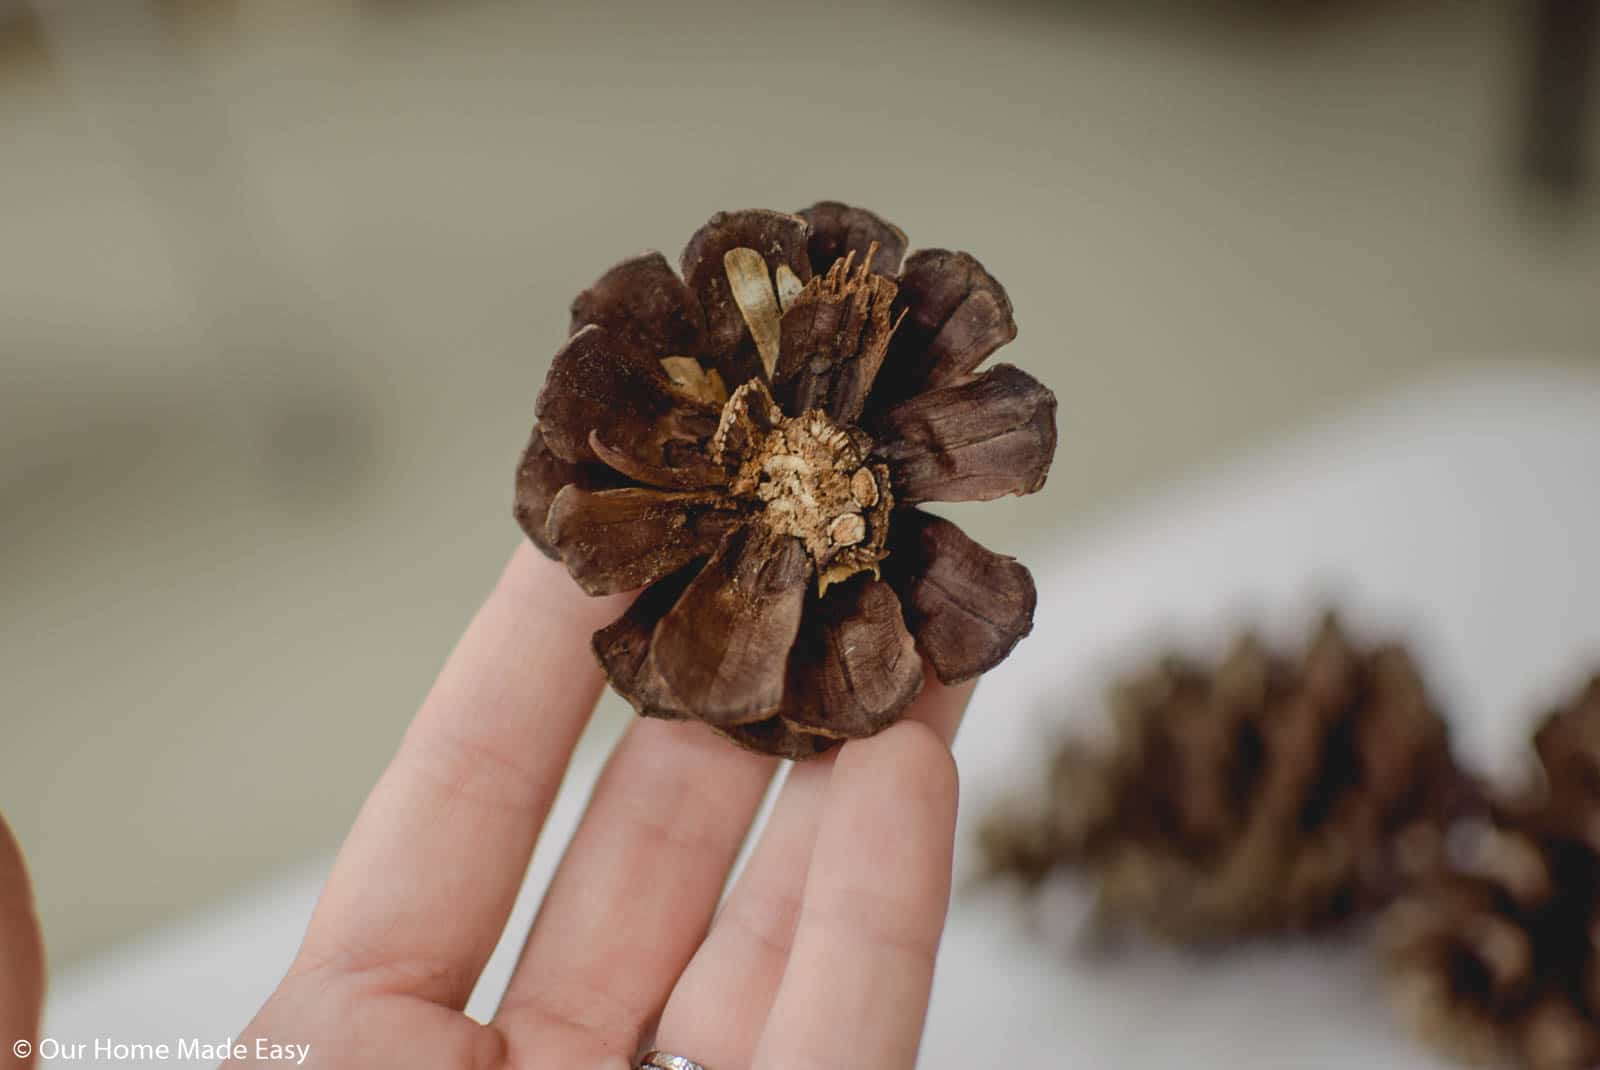 Sliced pinecones add a rustic touch to these DIY wood slice ornaments